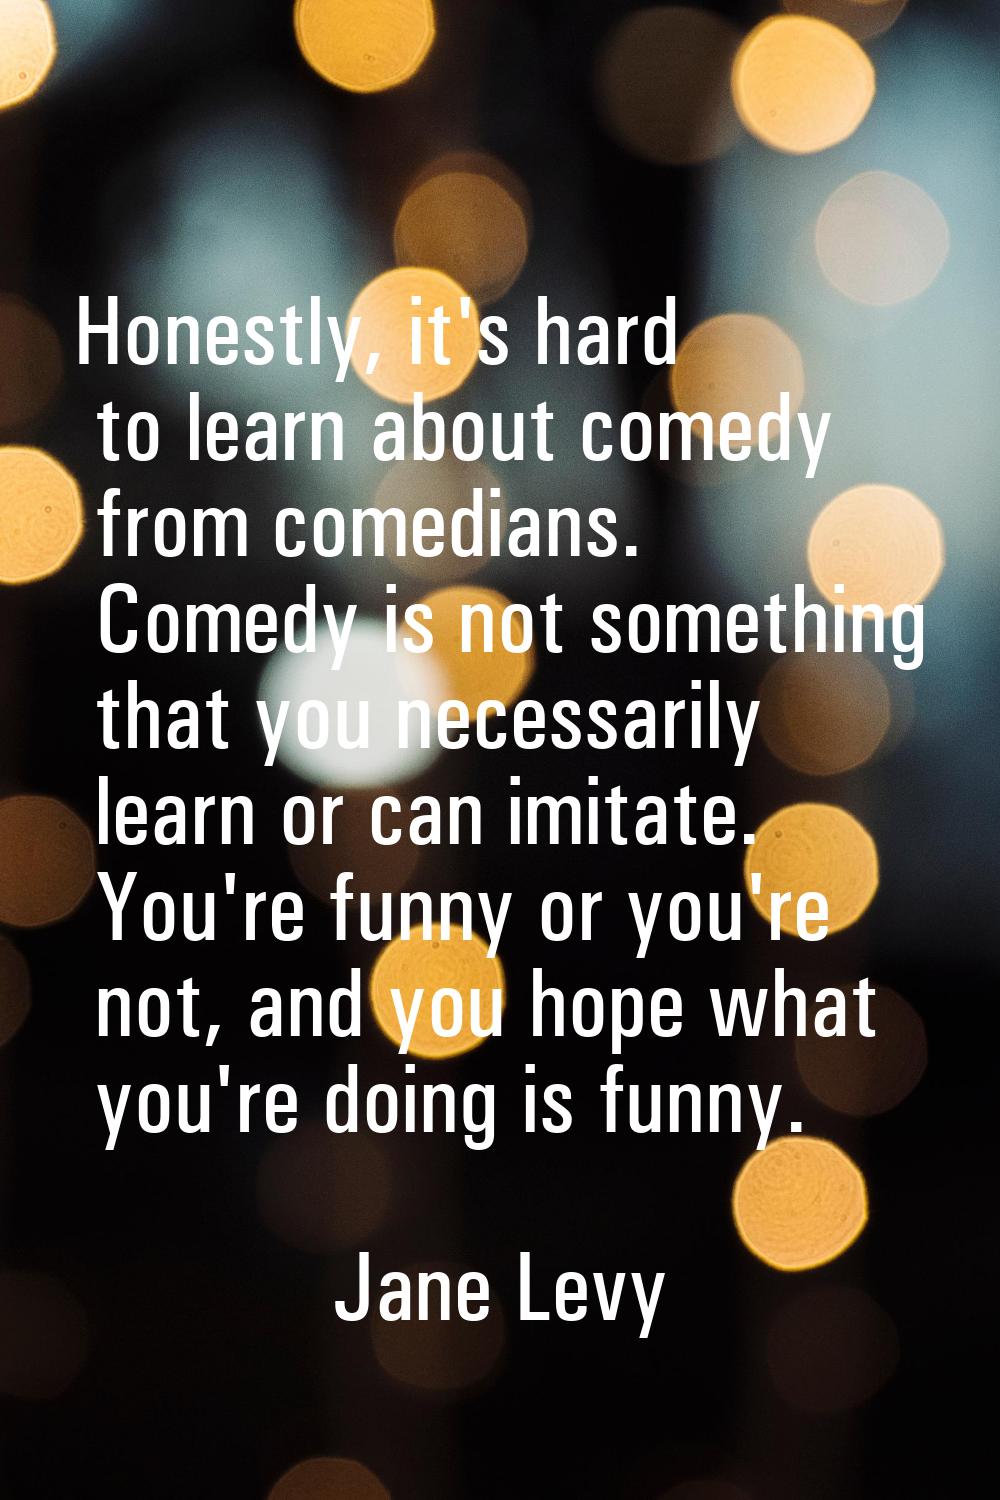 Honestly, it's hard to learn about comedy from comedians. Comedy is not something that you necessar